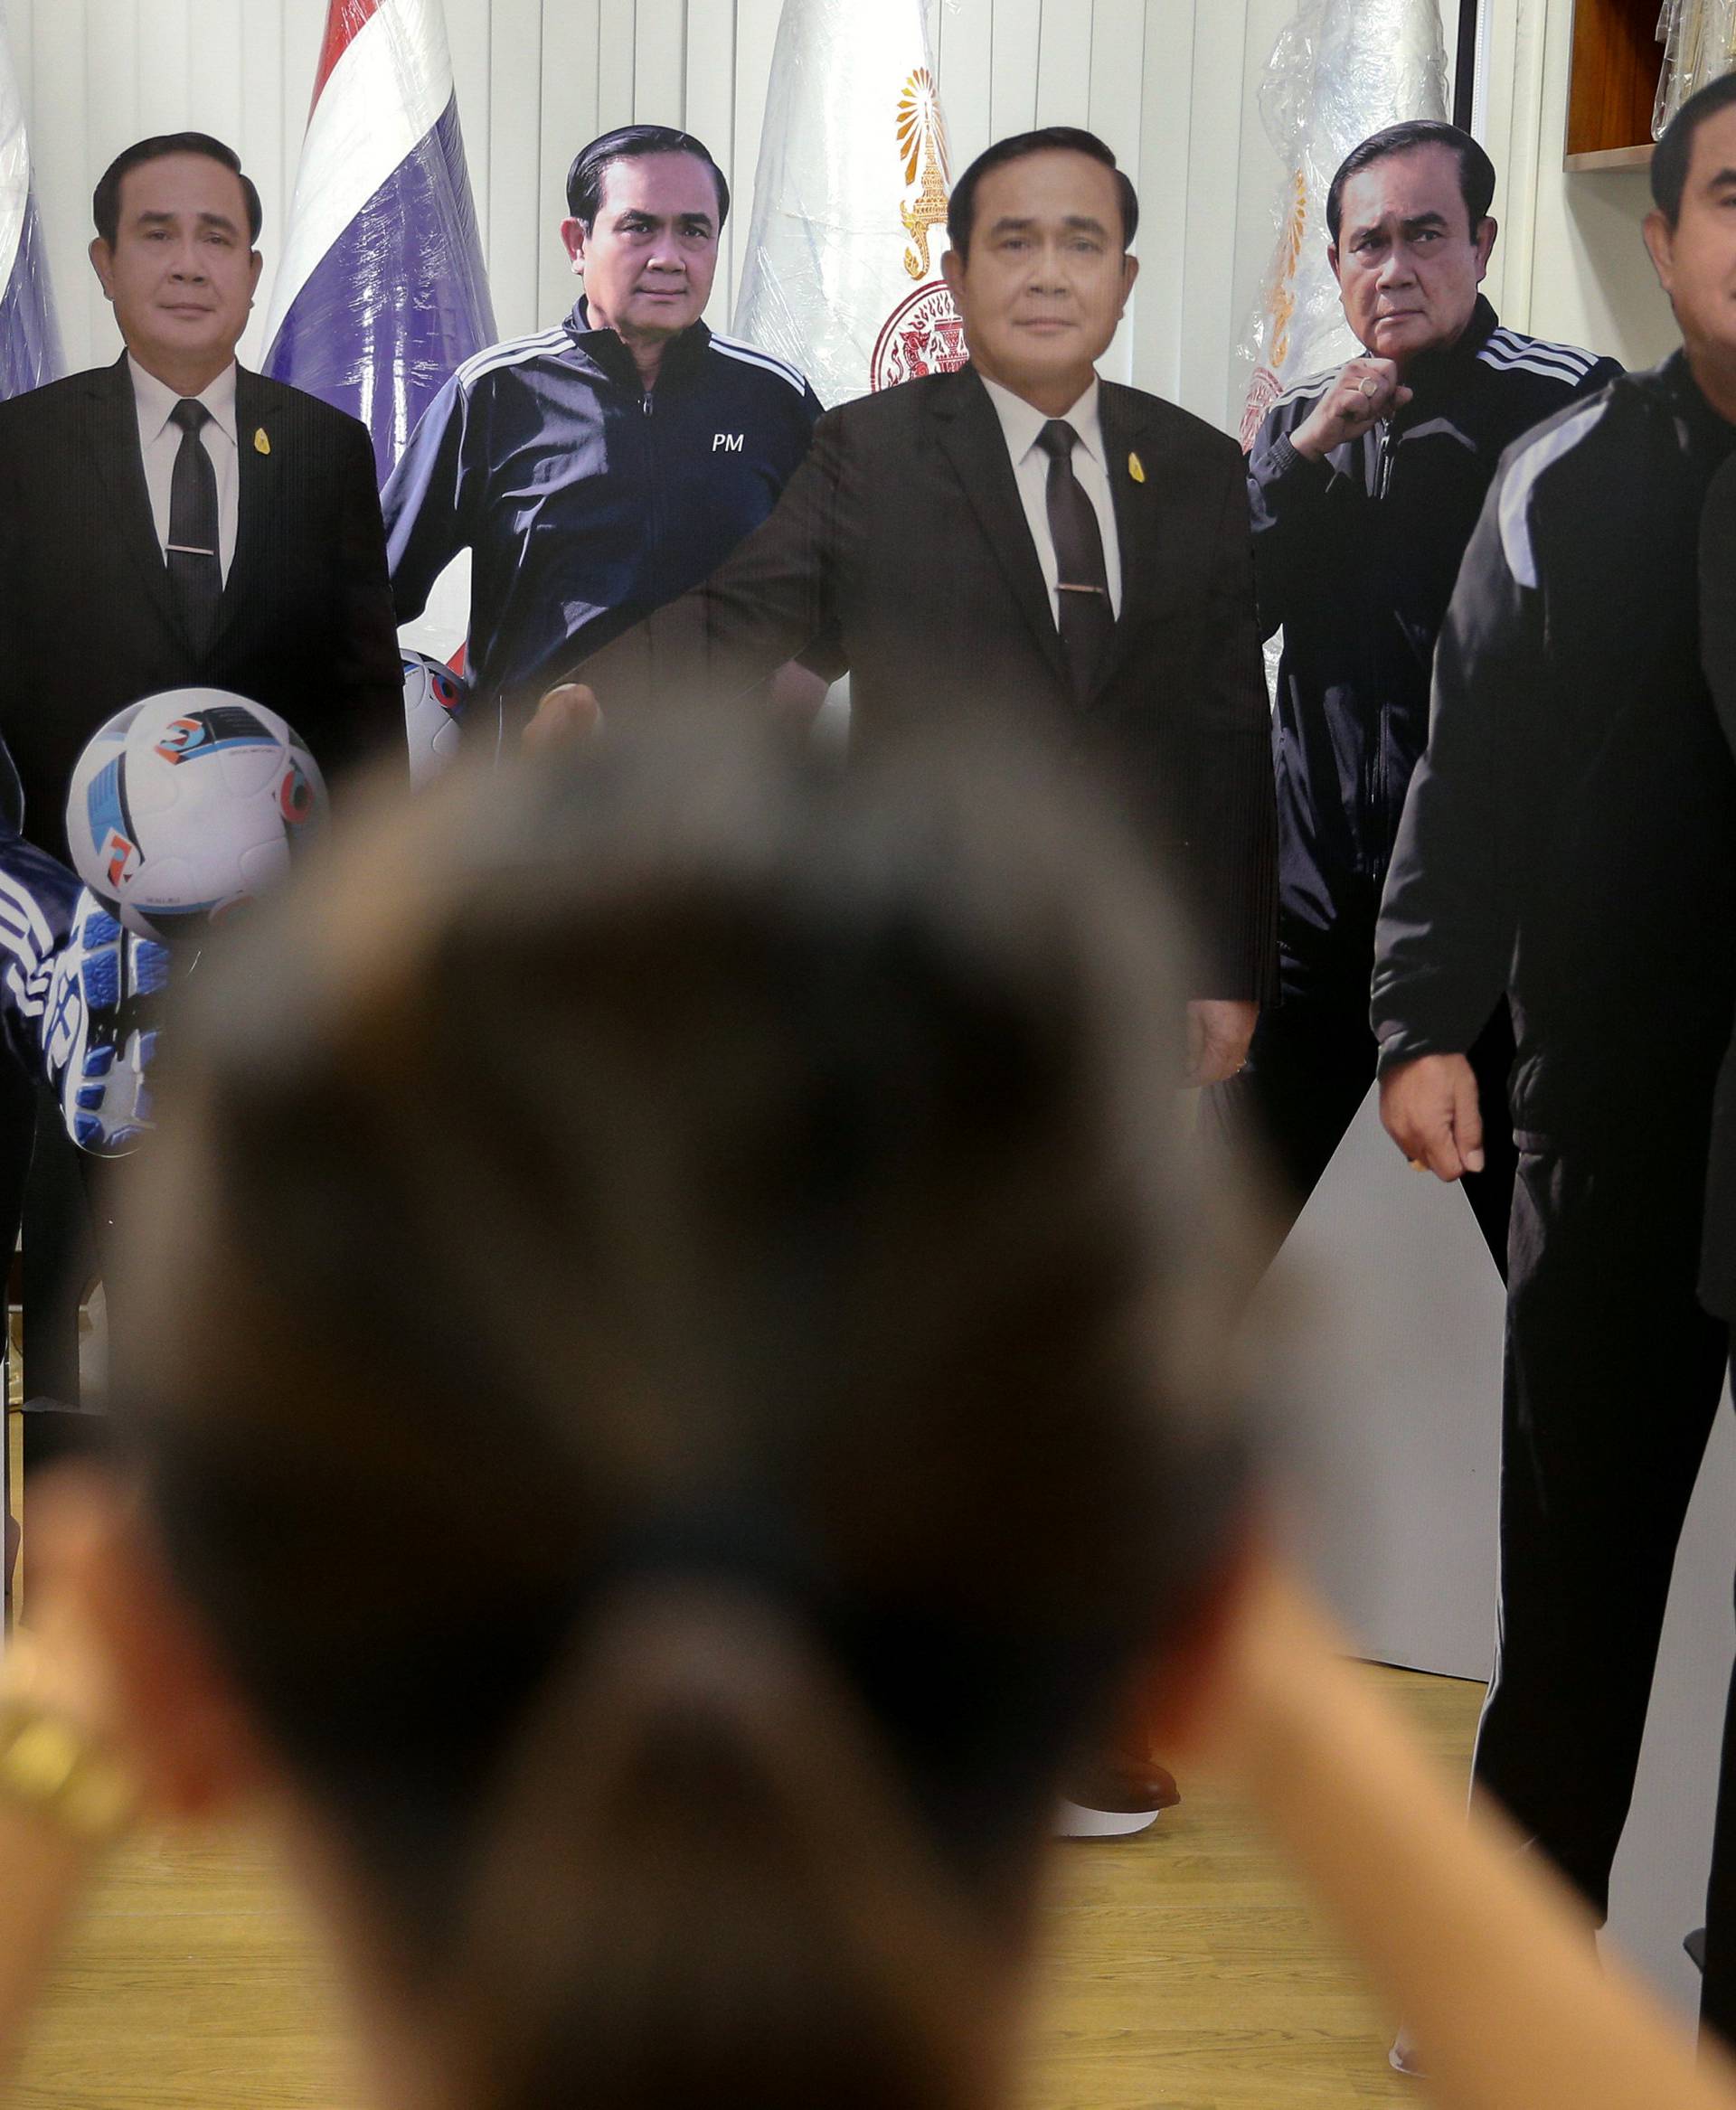 A journalist takes a photo of cardboard cut-outs of Thailand's Prime Minister Prayuth Chan-ocha at Government House in Bangkok